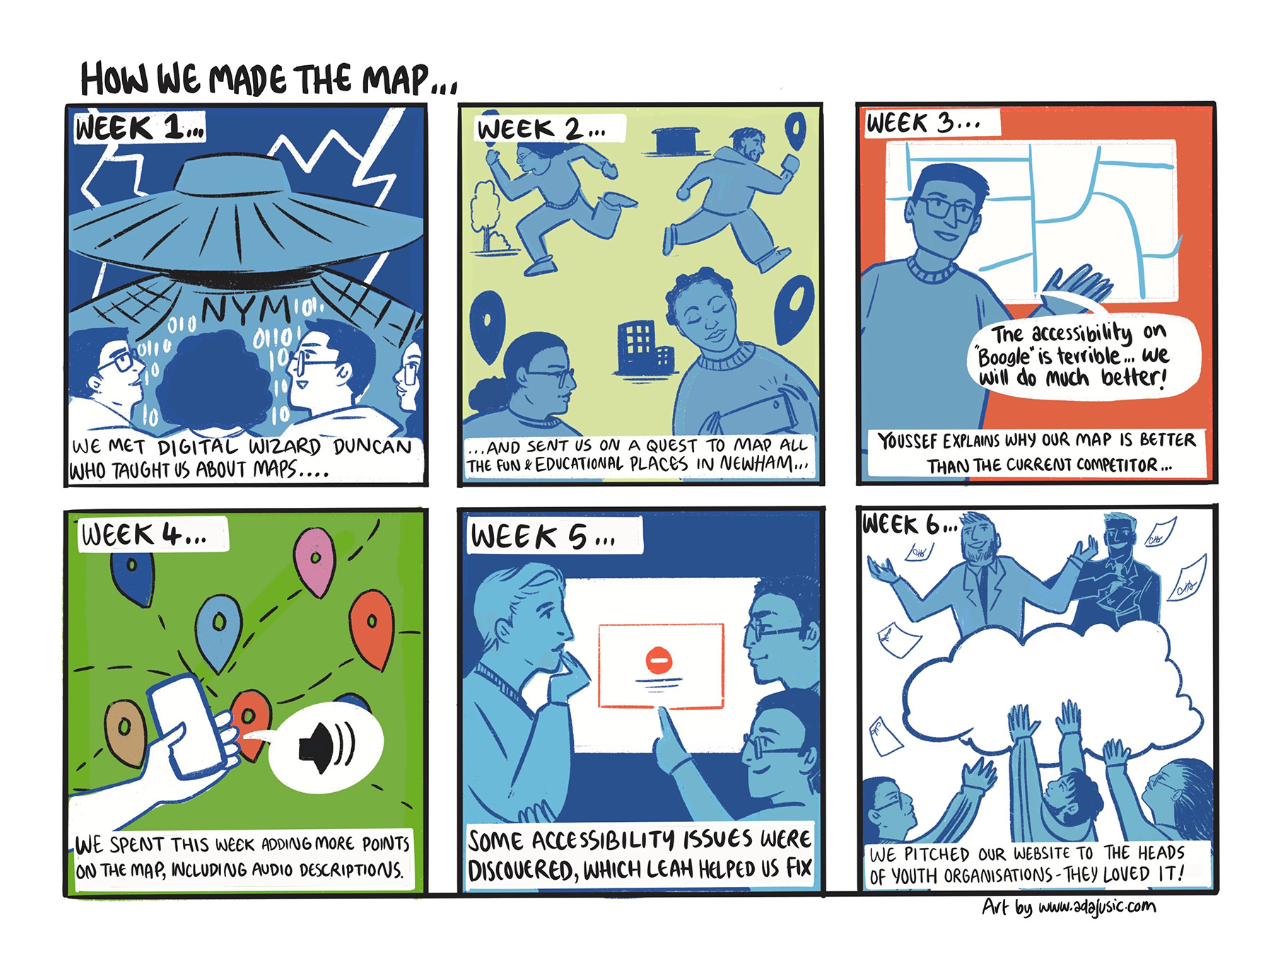 How we made the map - a six panel comic strip.
Week 1: A flying saucer. Text: we met digital wizard Duncan, who taught us about maps... 
Week 2: People running around with map pins. Text: ...and sent us on a quest to map all the fun and educational places in Newham...
Week 3: A man says "the accessibility on 'Boogle' is terrible, we will do much better!" Text: Youseff explains why our map is better than the current competitor
Week 4. A phone pointed at connected map pins, with audio being generated. Text: We spent this week adding more points on the map, including audio descriptions
Week 5. Three people look at a computer with a no-entry sign. Text: Some accessibility issues were discovered, which Leah helped us fix
Week 6. Two men in suits sitting in a cloud throw money to people beneath. Text: We pitched our website to the heads of youth organisations. They loved it!
